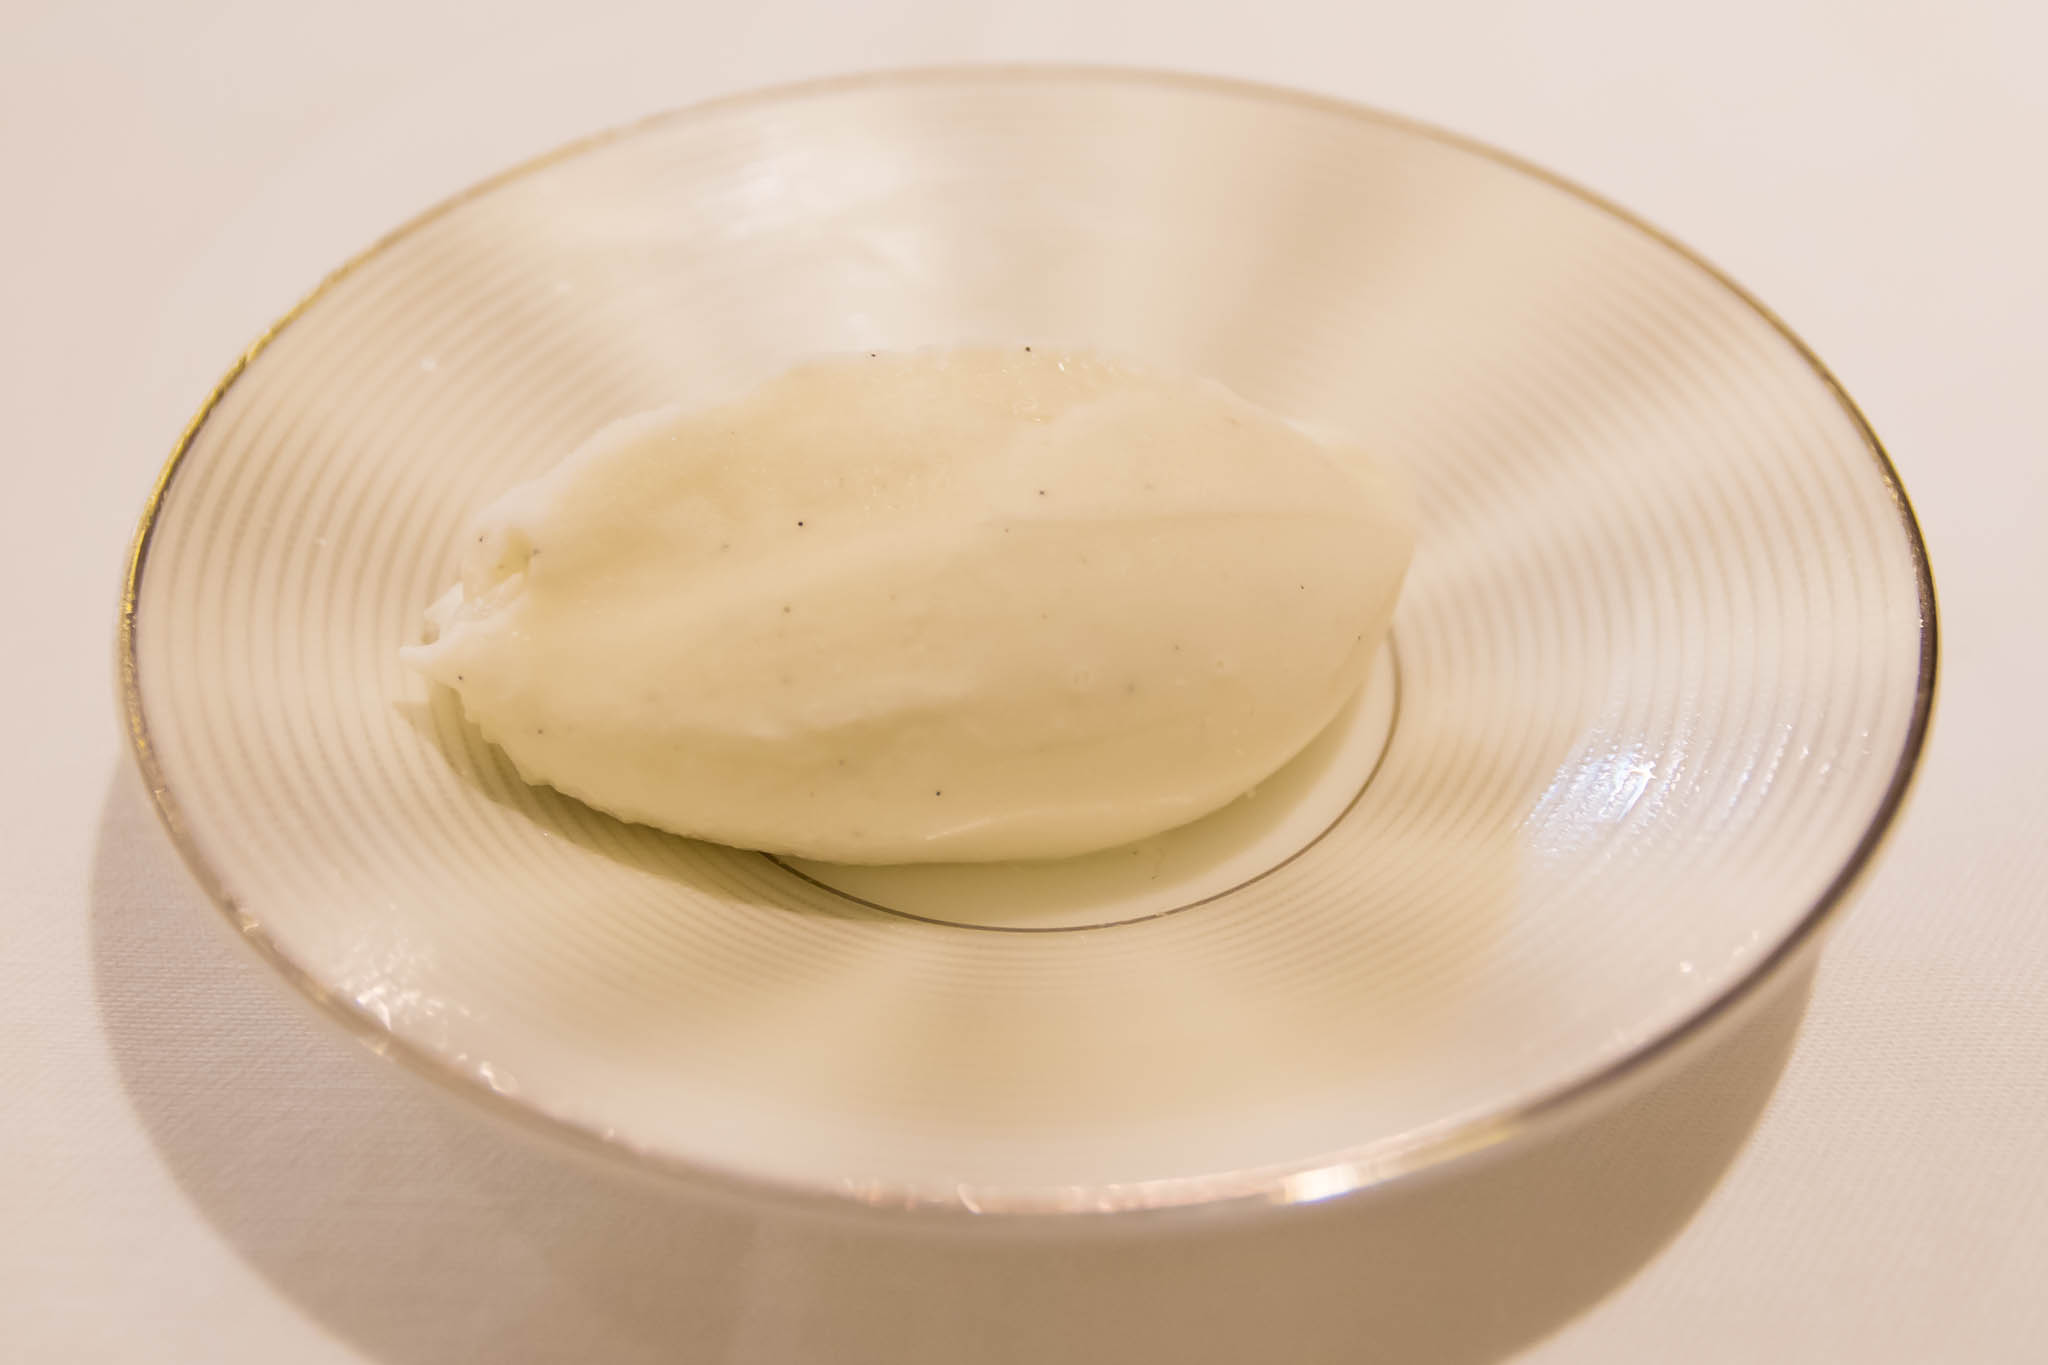 a white object on a plate